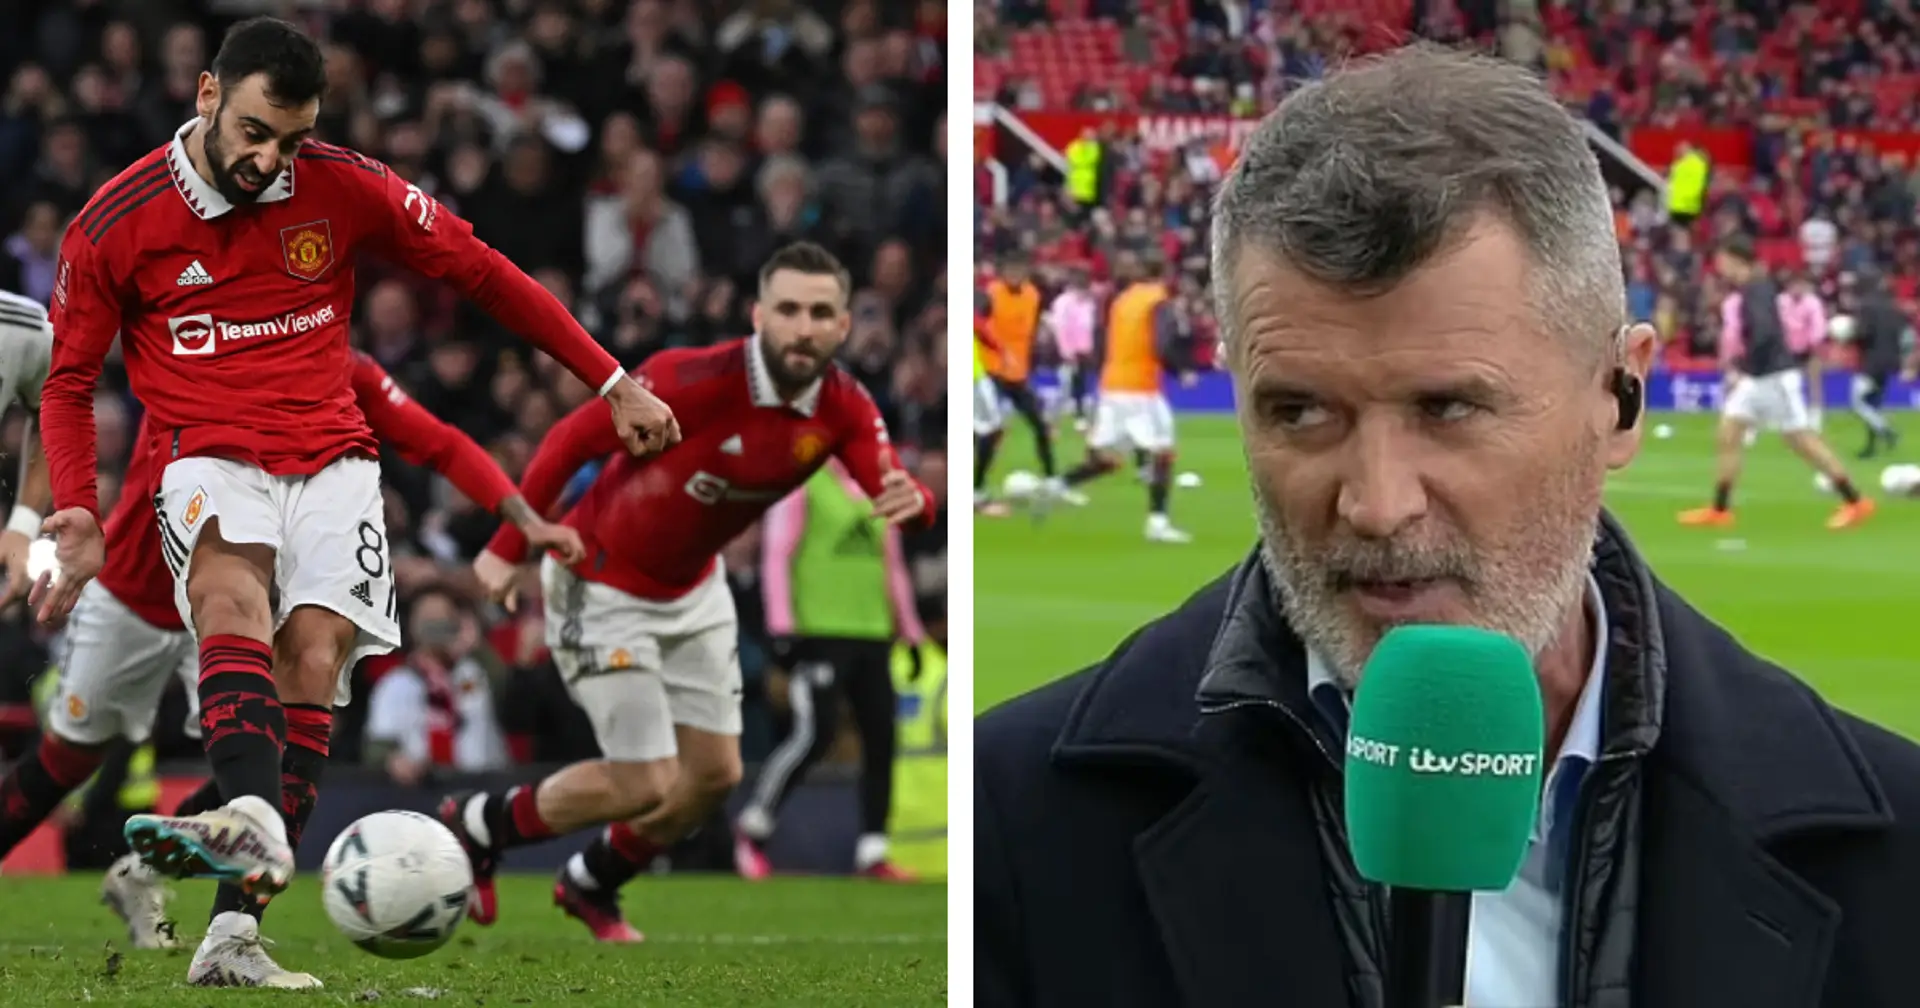 'I wouldn't want to hear that type of talk': Roy Keane names one major issue Man United should just ignore